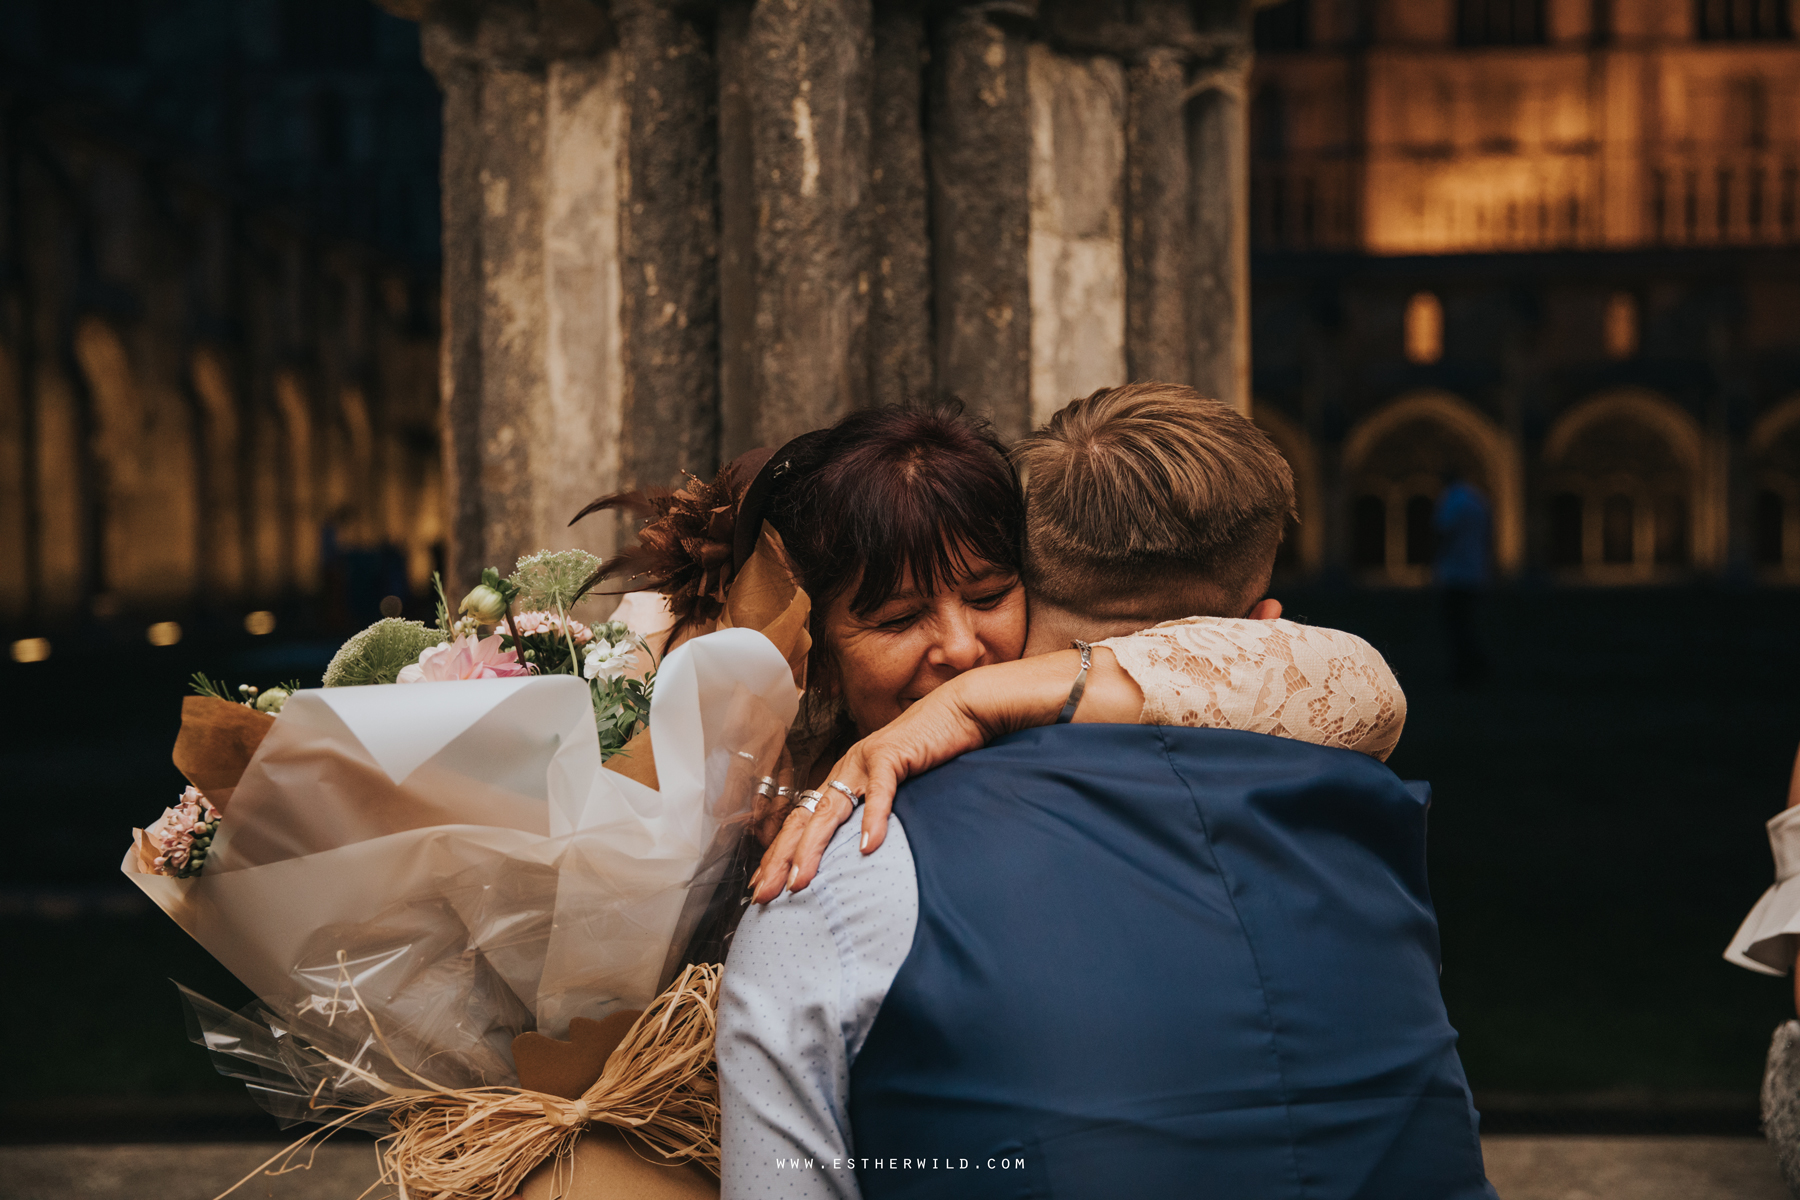 Norwich_Castle_Arcade_Grosvenor_Chip_Birdcage_Cathedral_Cloisters_Refectory_Wedding_Photography_Esther_Wild_Photographer_Norfolk_Kings_Lynn_3R8A3169.jpg